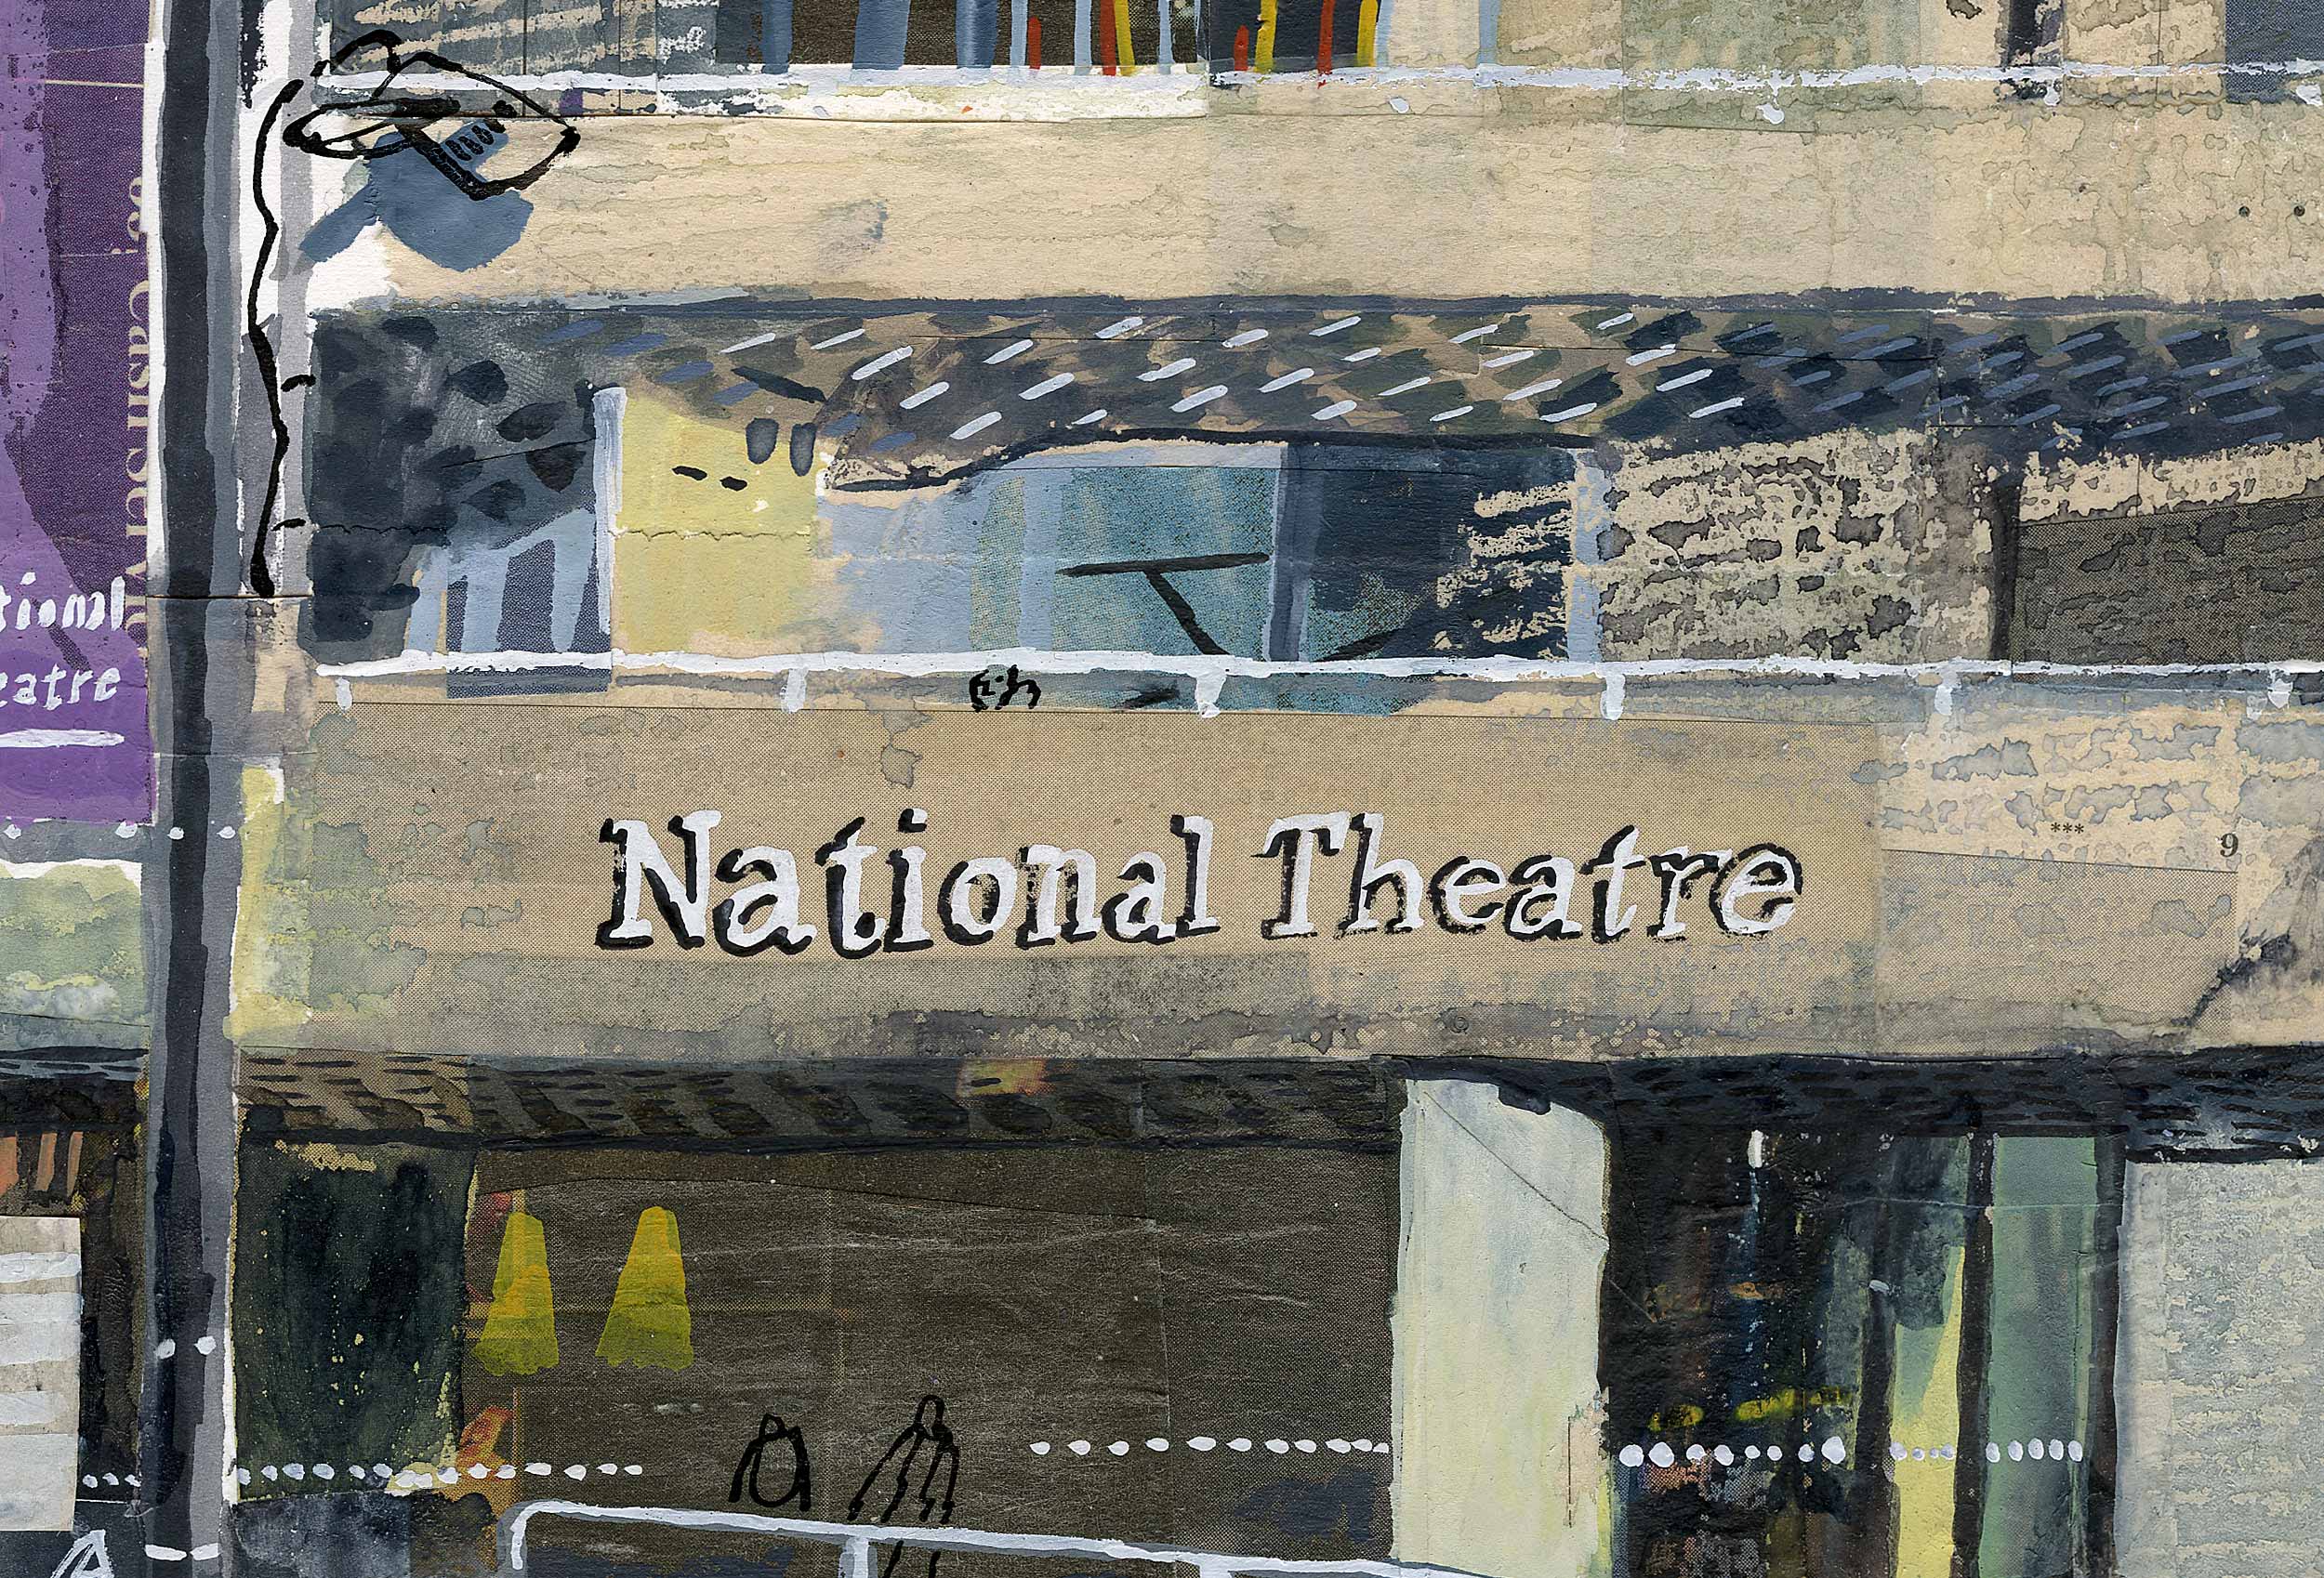 National Theatre by James Oses, image 2